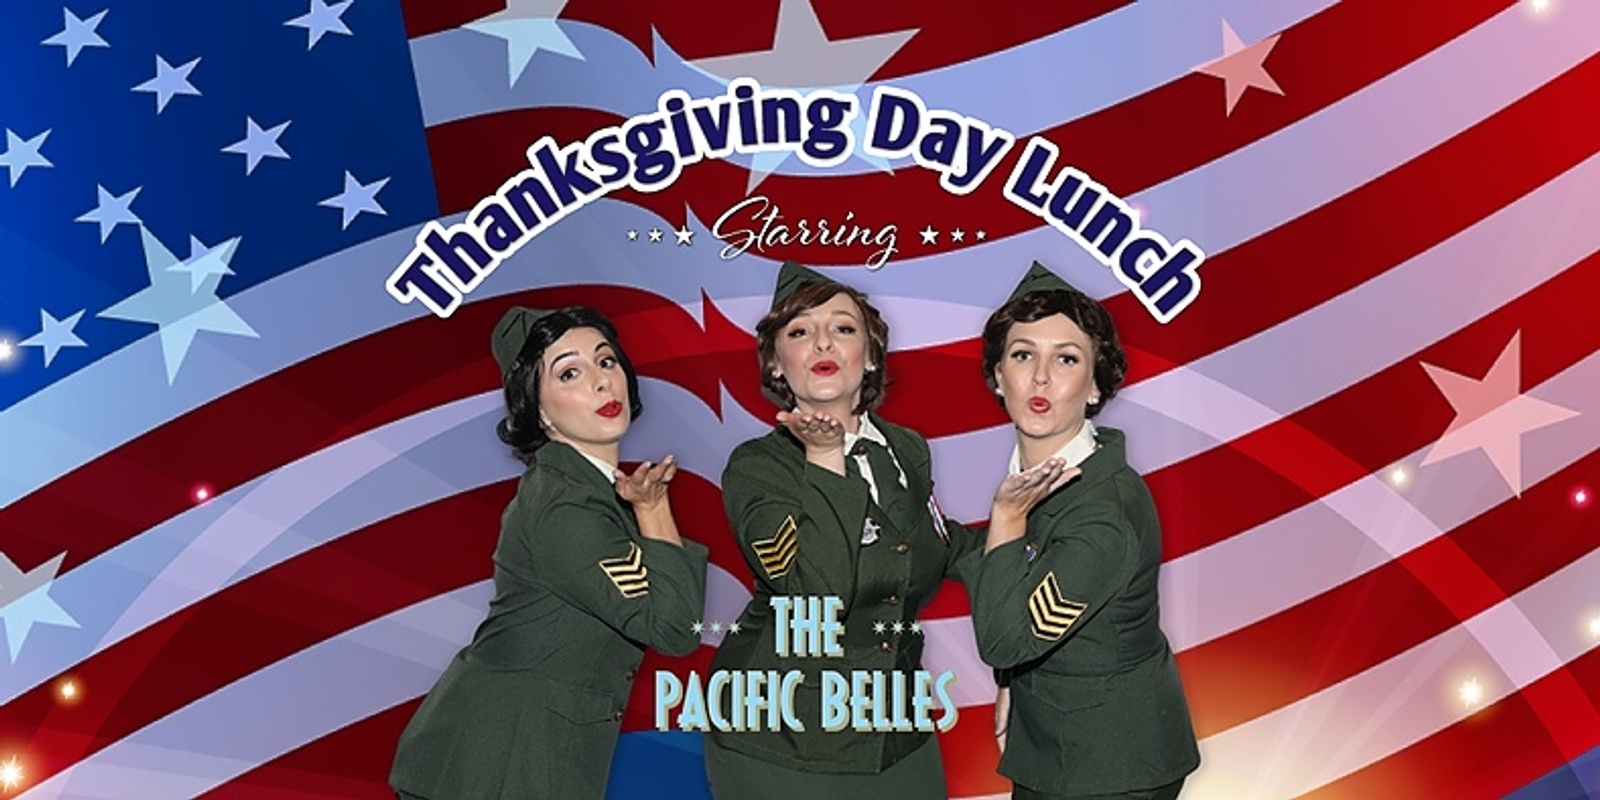 Banner image for Thanksgiving Day Lunch starring "The Pacific Belles"